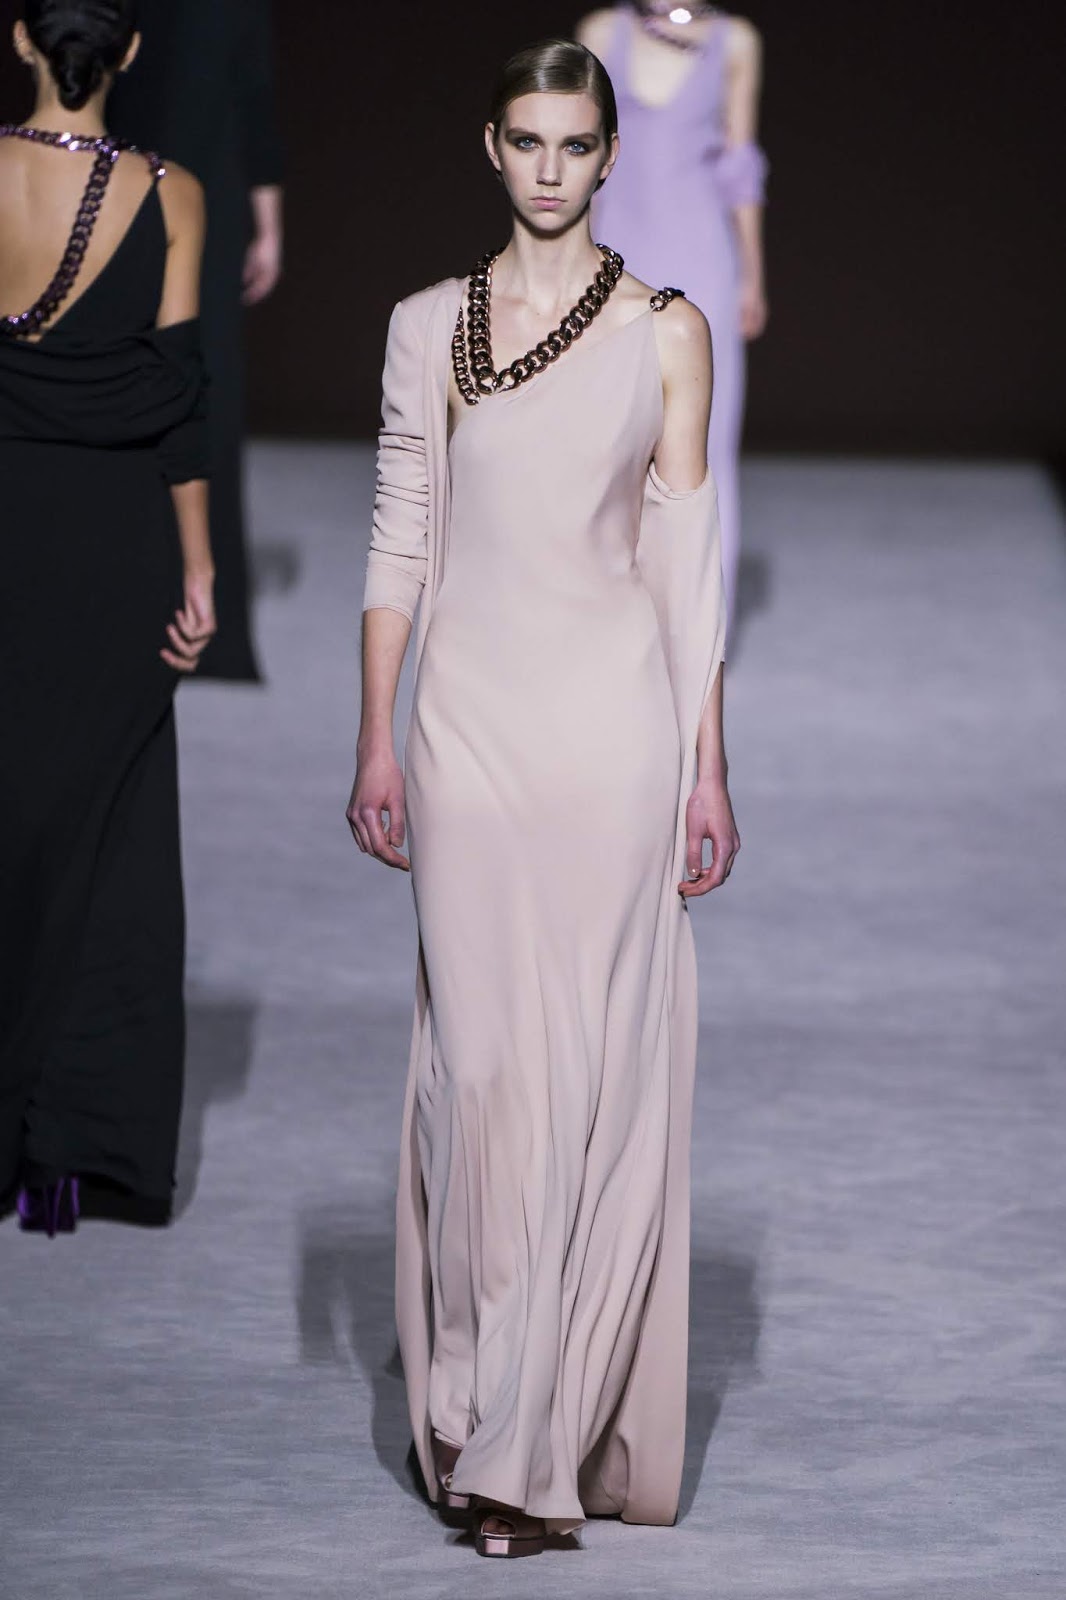 Runway Cool: TOM FORD March 20, 2019 | ZsaZsa Bellagio - Like No Other